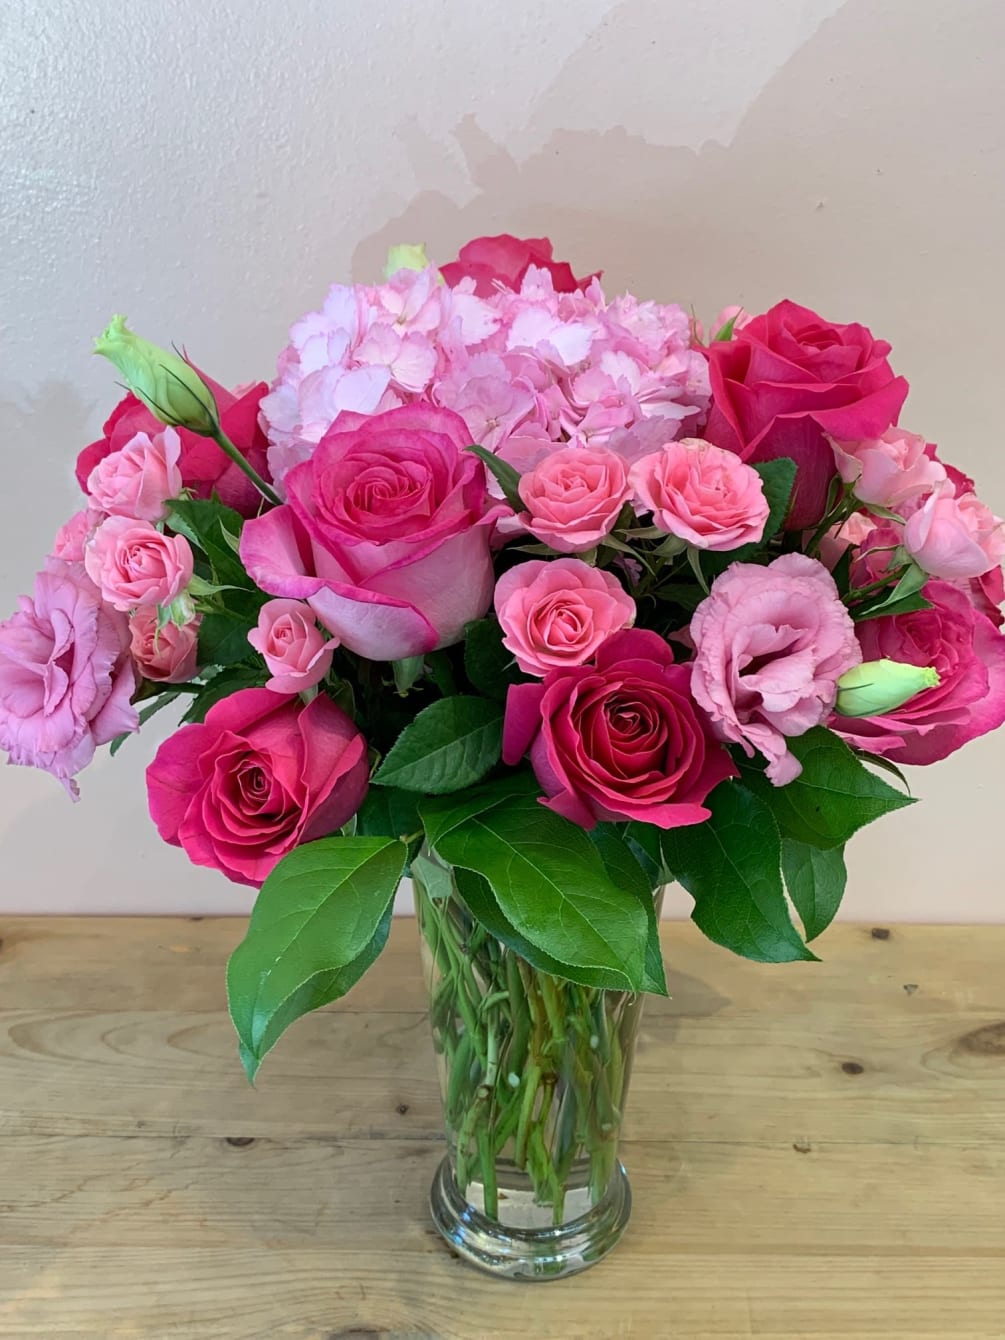 This beautiful flower arrangement is made with fresh pink Roses, Spray Roses